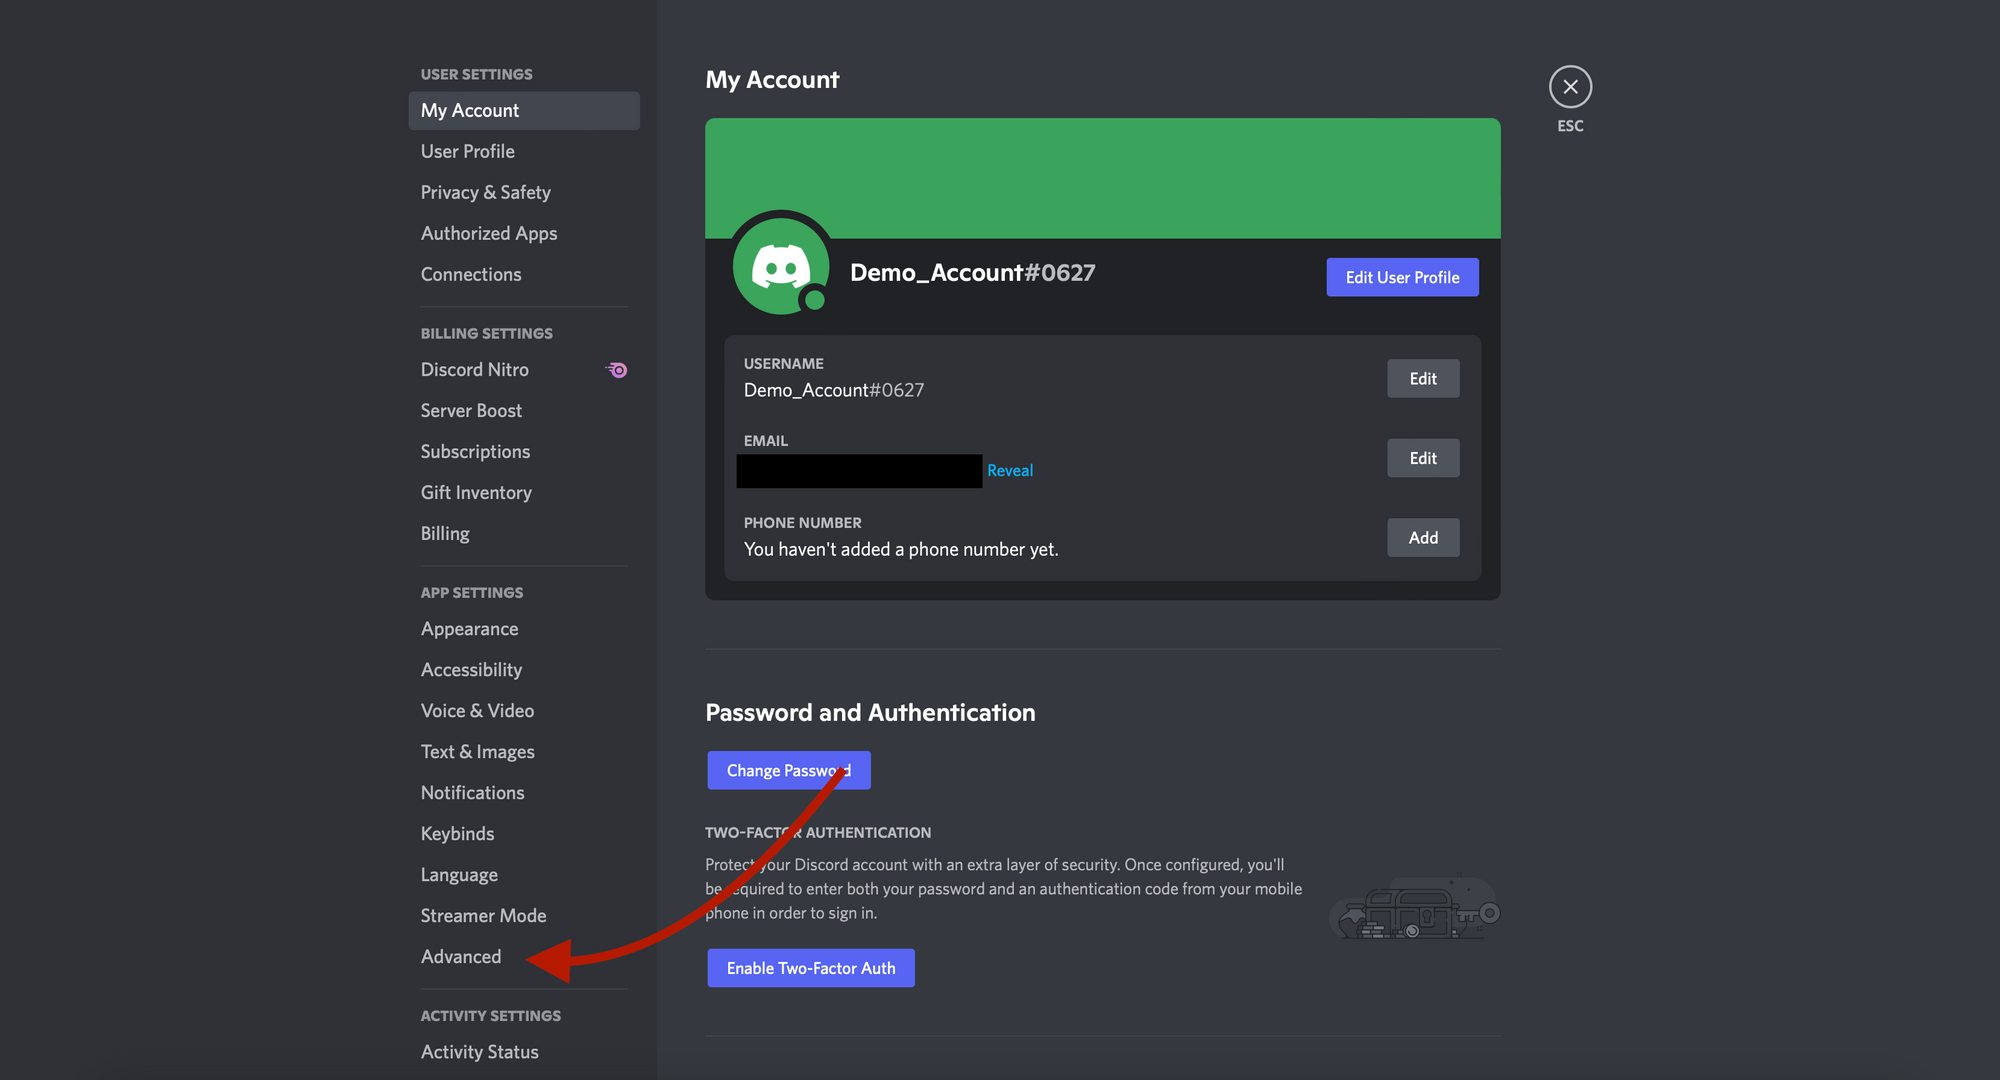 How to Enable Developer Mode in Discord? - Technoresult